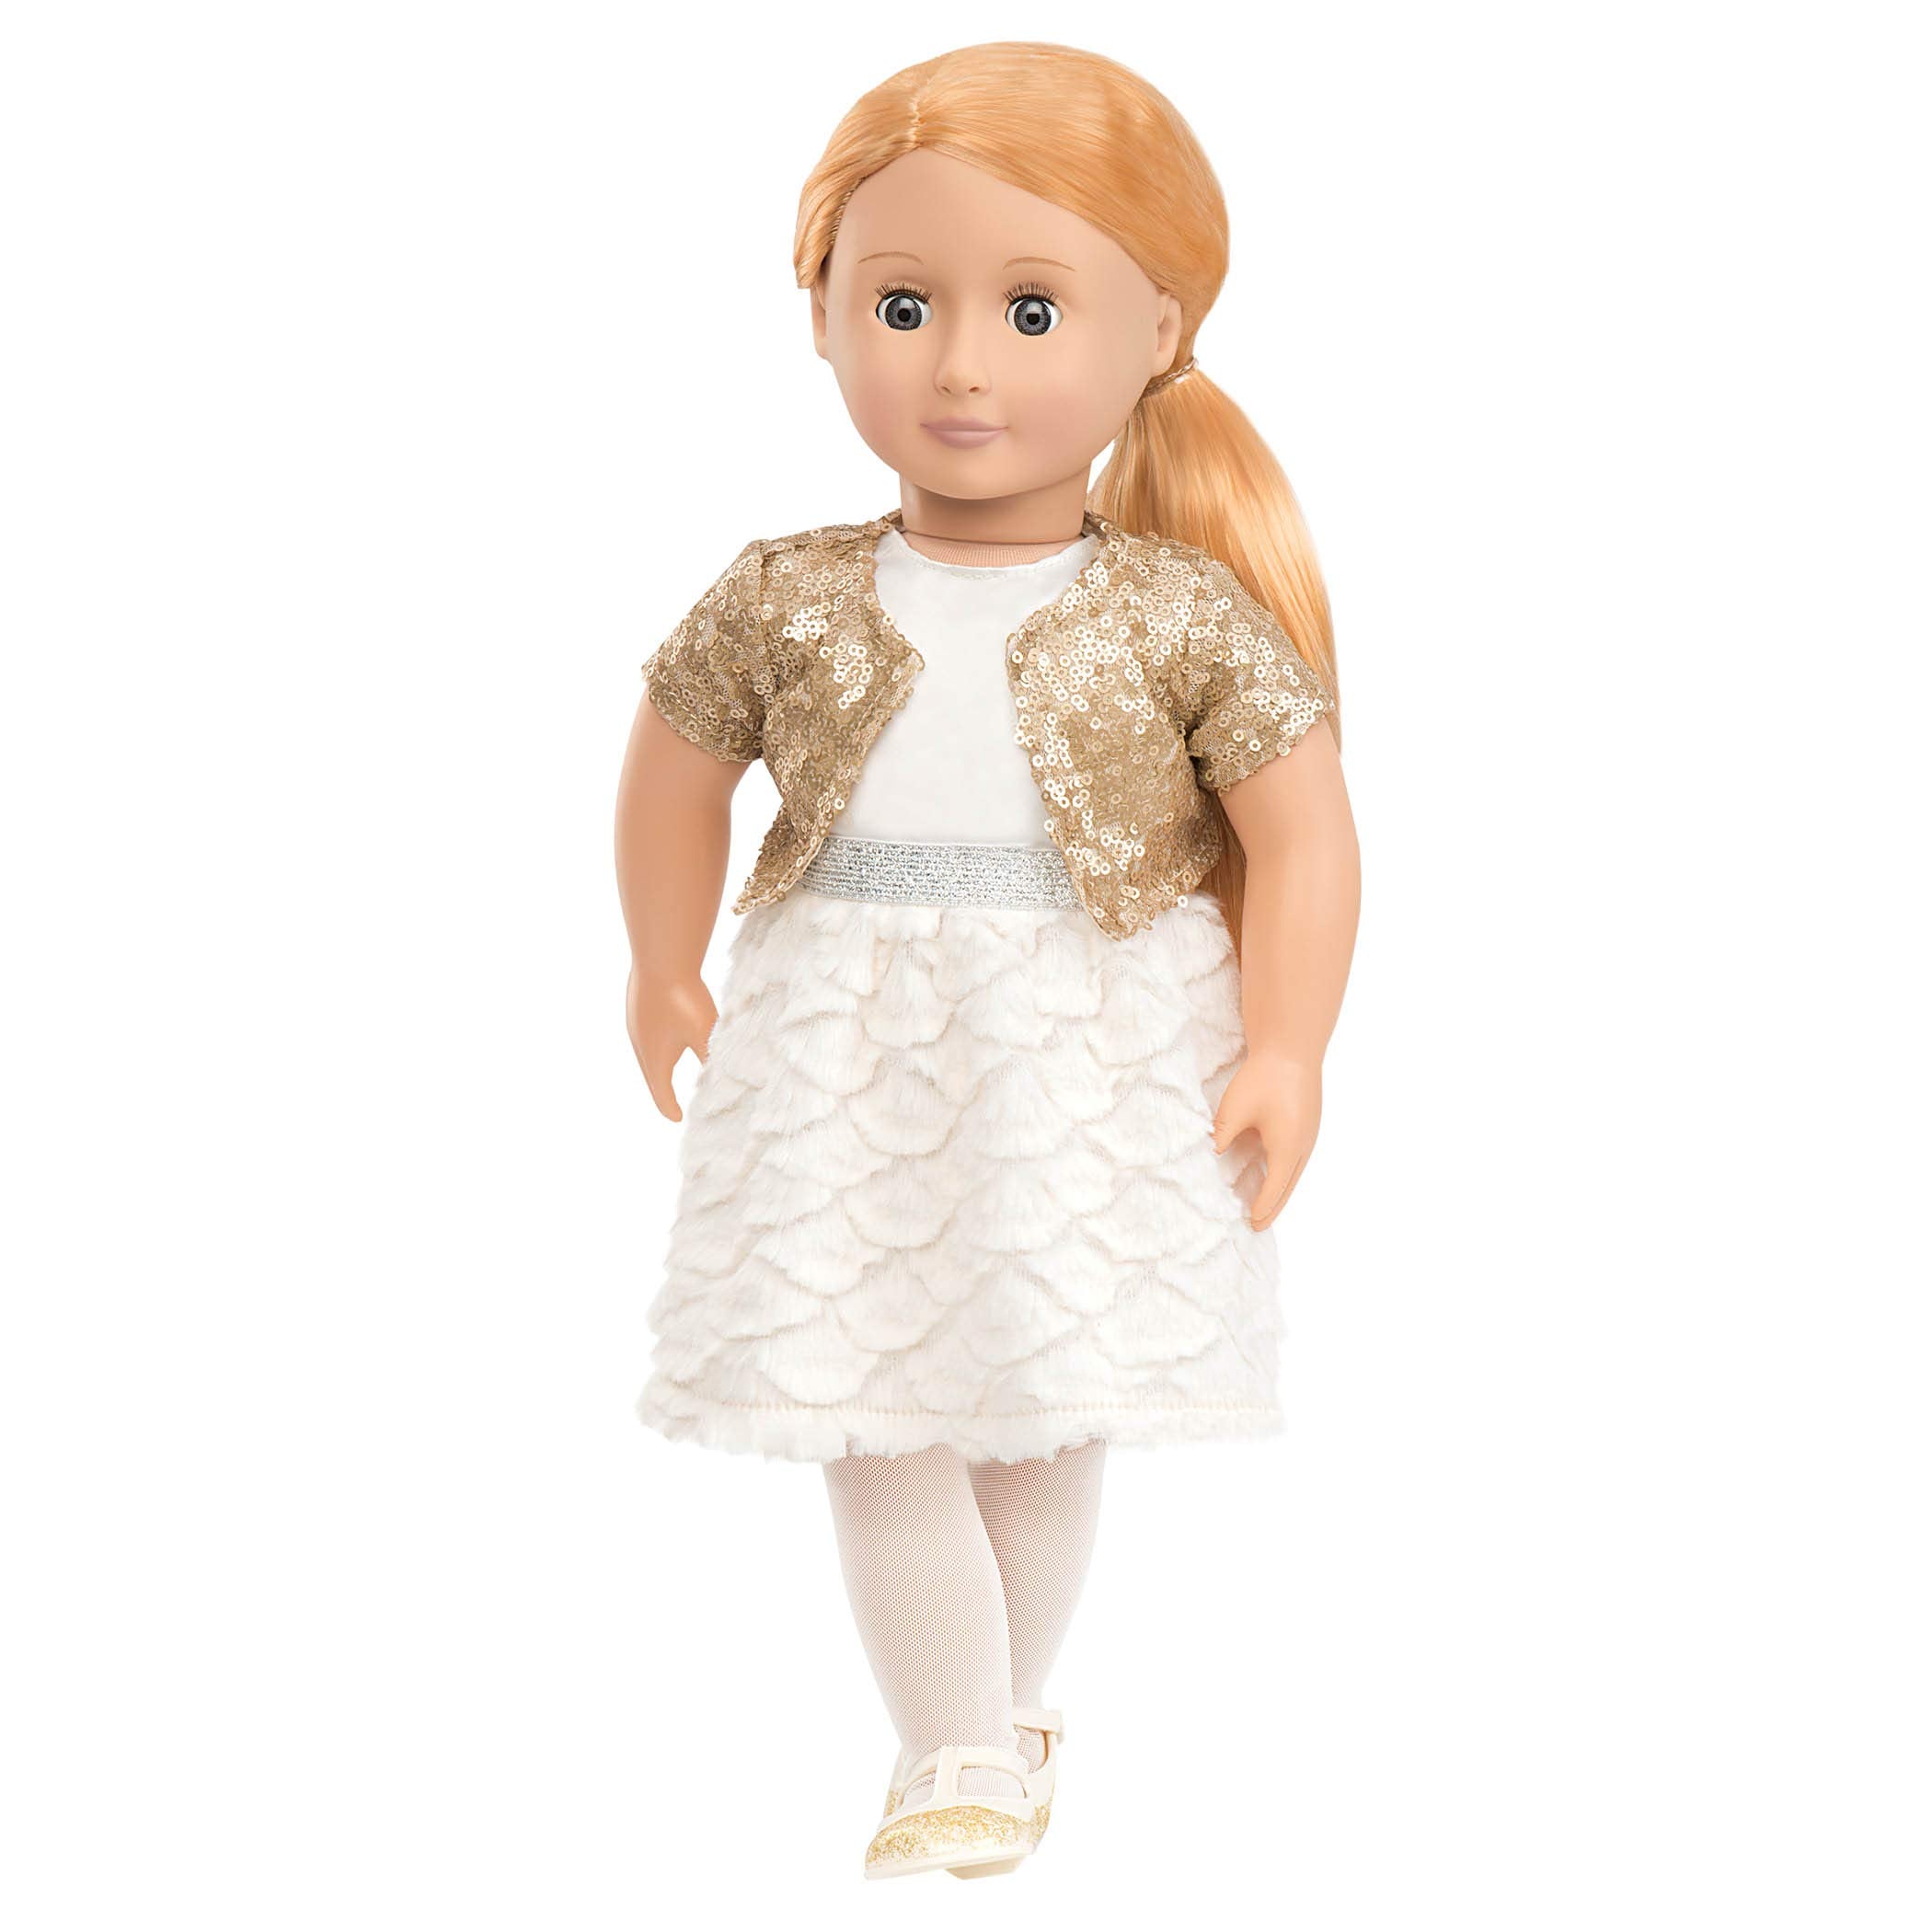 Doll In Sequin Outfit, Hope